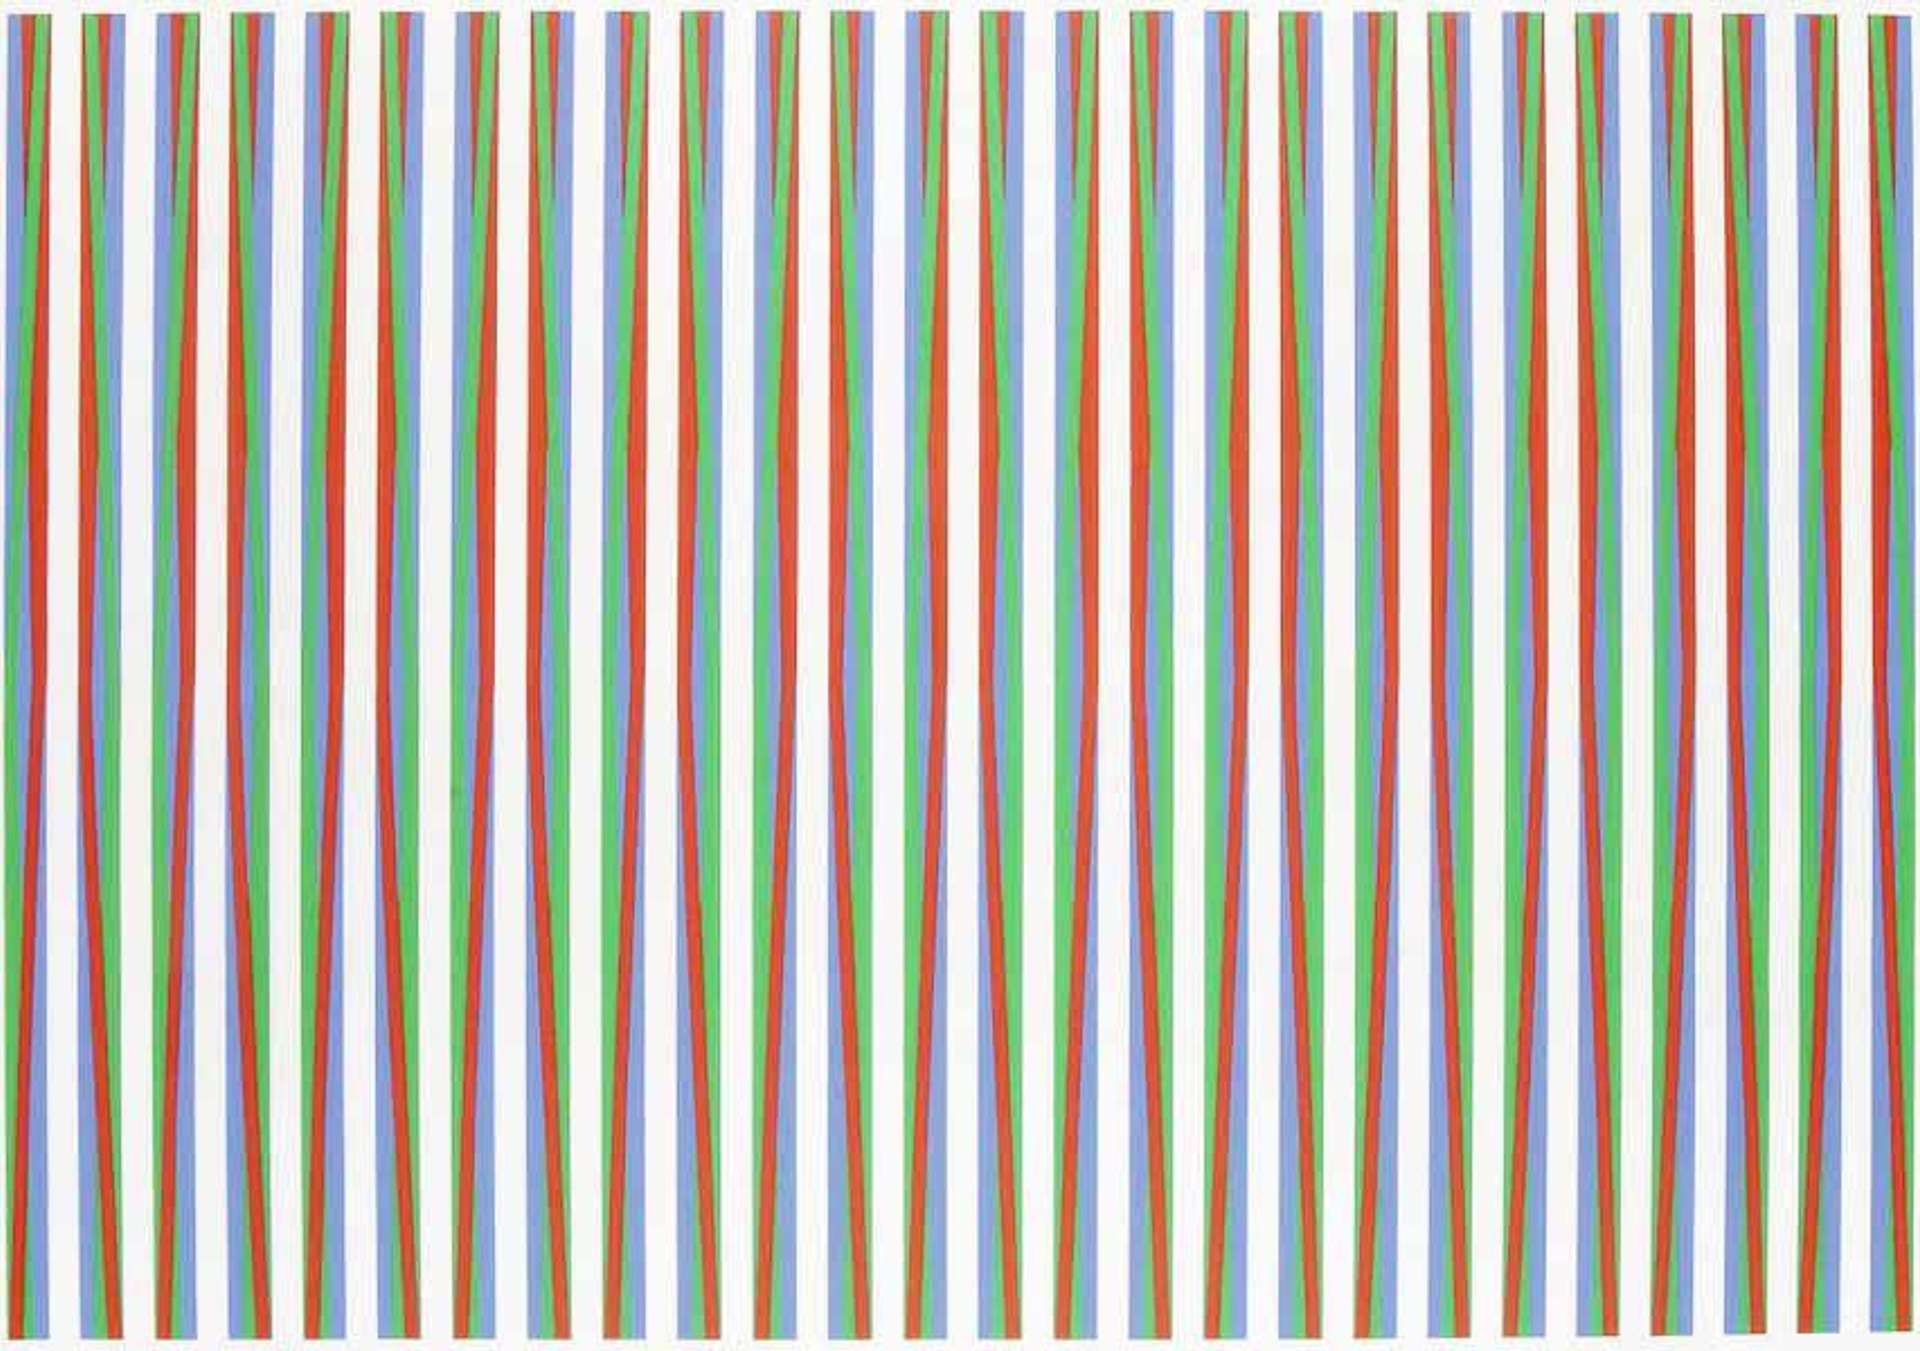 Displaying vertical, twisting bars of red, green and blue, separated by intervals of white space, in turn generate a powerful and spirited array of imagined colours for the viewer. 